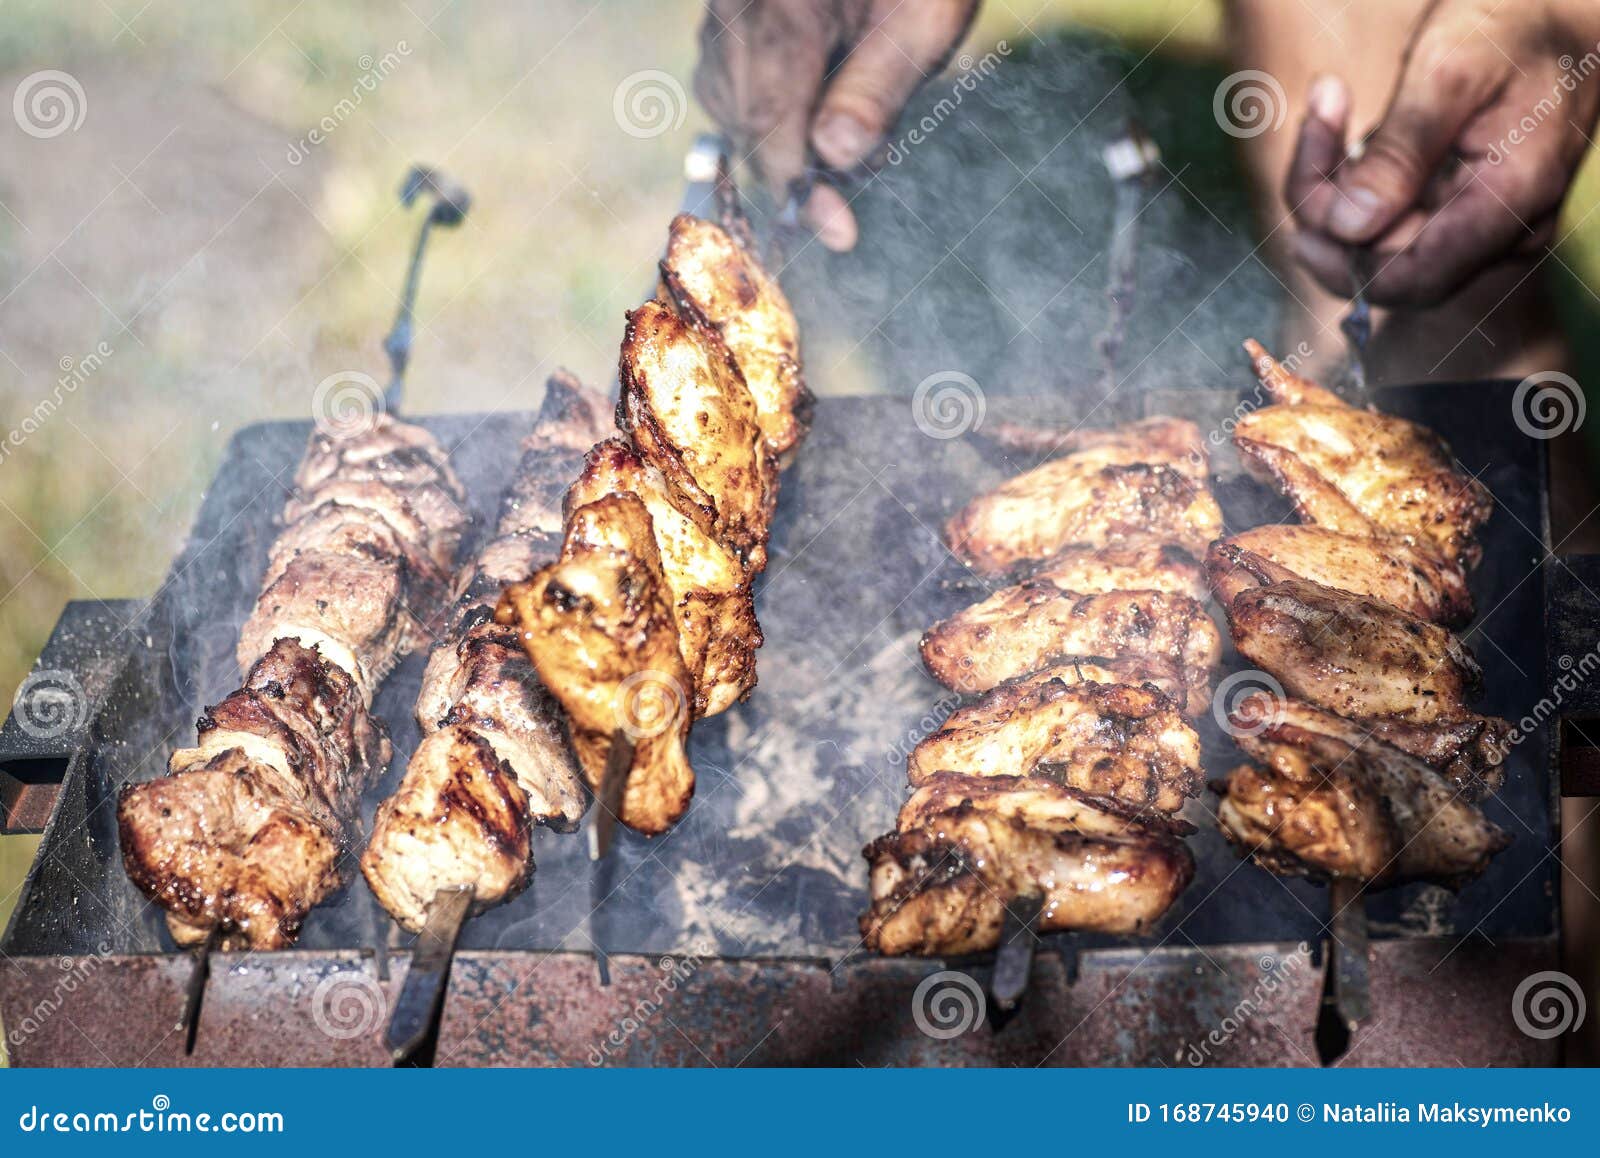 Bbq Chicken Wings In Sauce A Man Twirls Chicken Wings On Skewers Over Mongal Kebab Time Fried Chicken Wings Barbecue Stock Photo Image Of Rosemary Delicious 168745940,Porcelain Doll Collectors